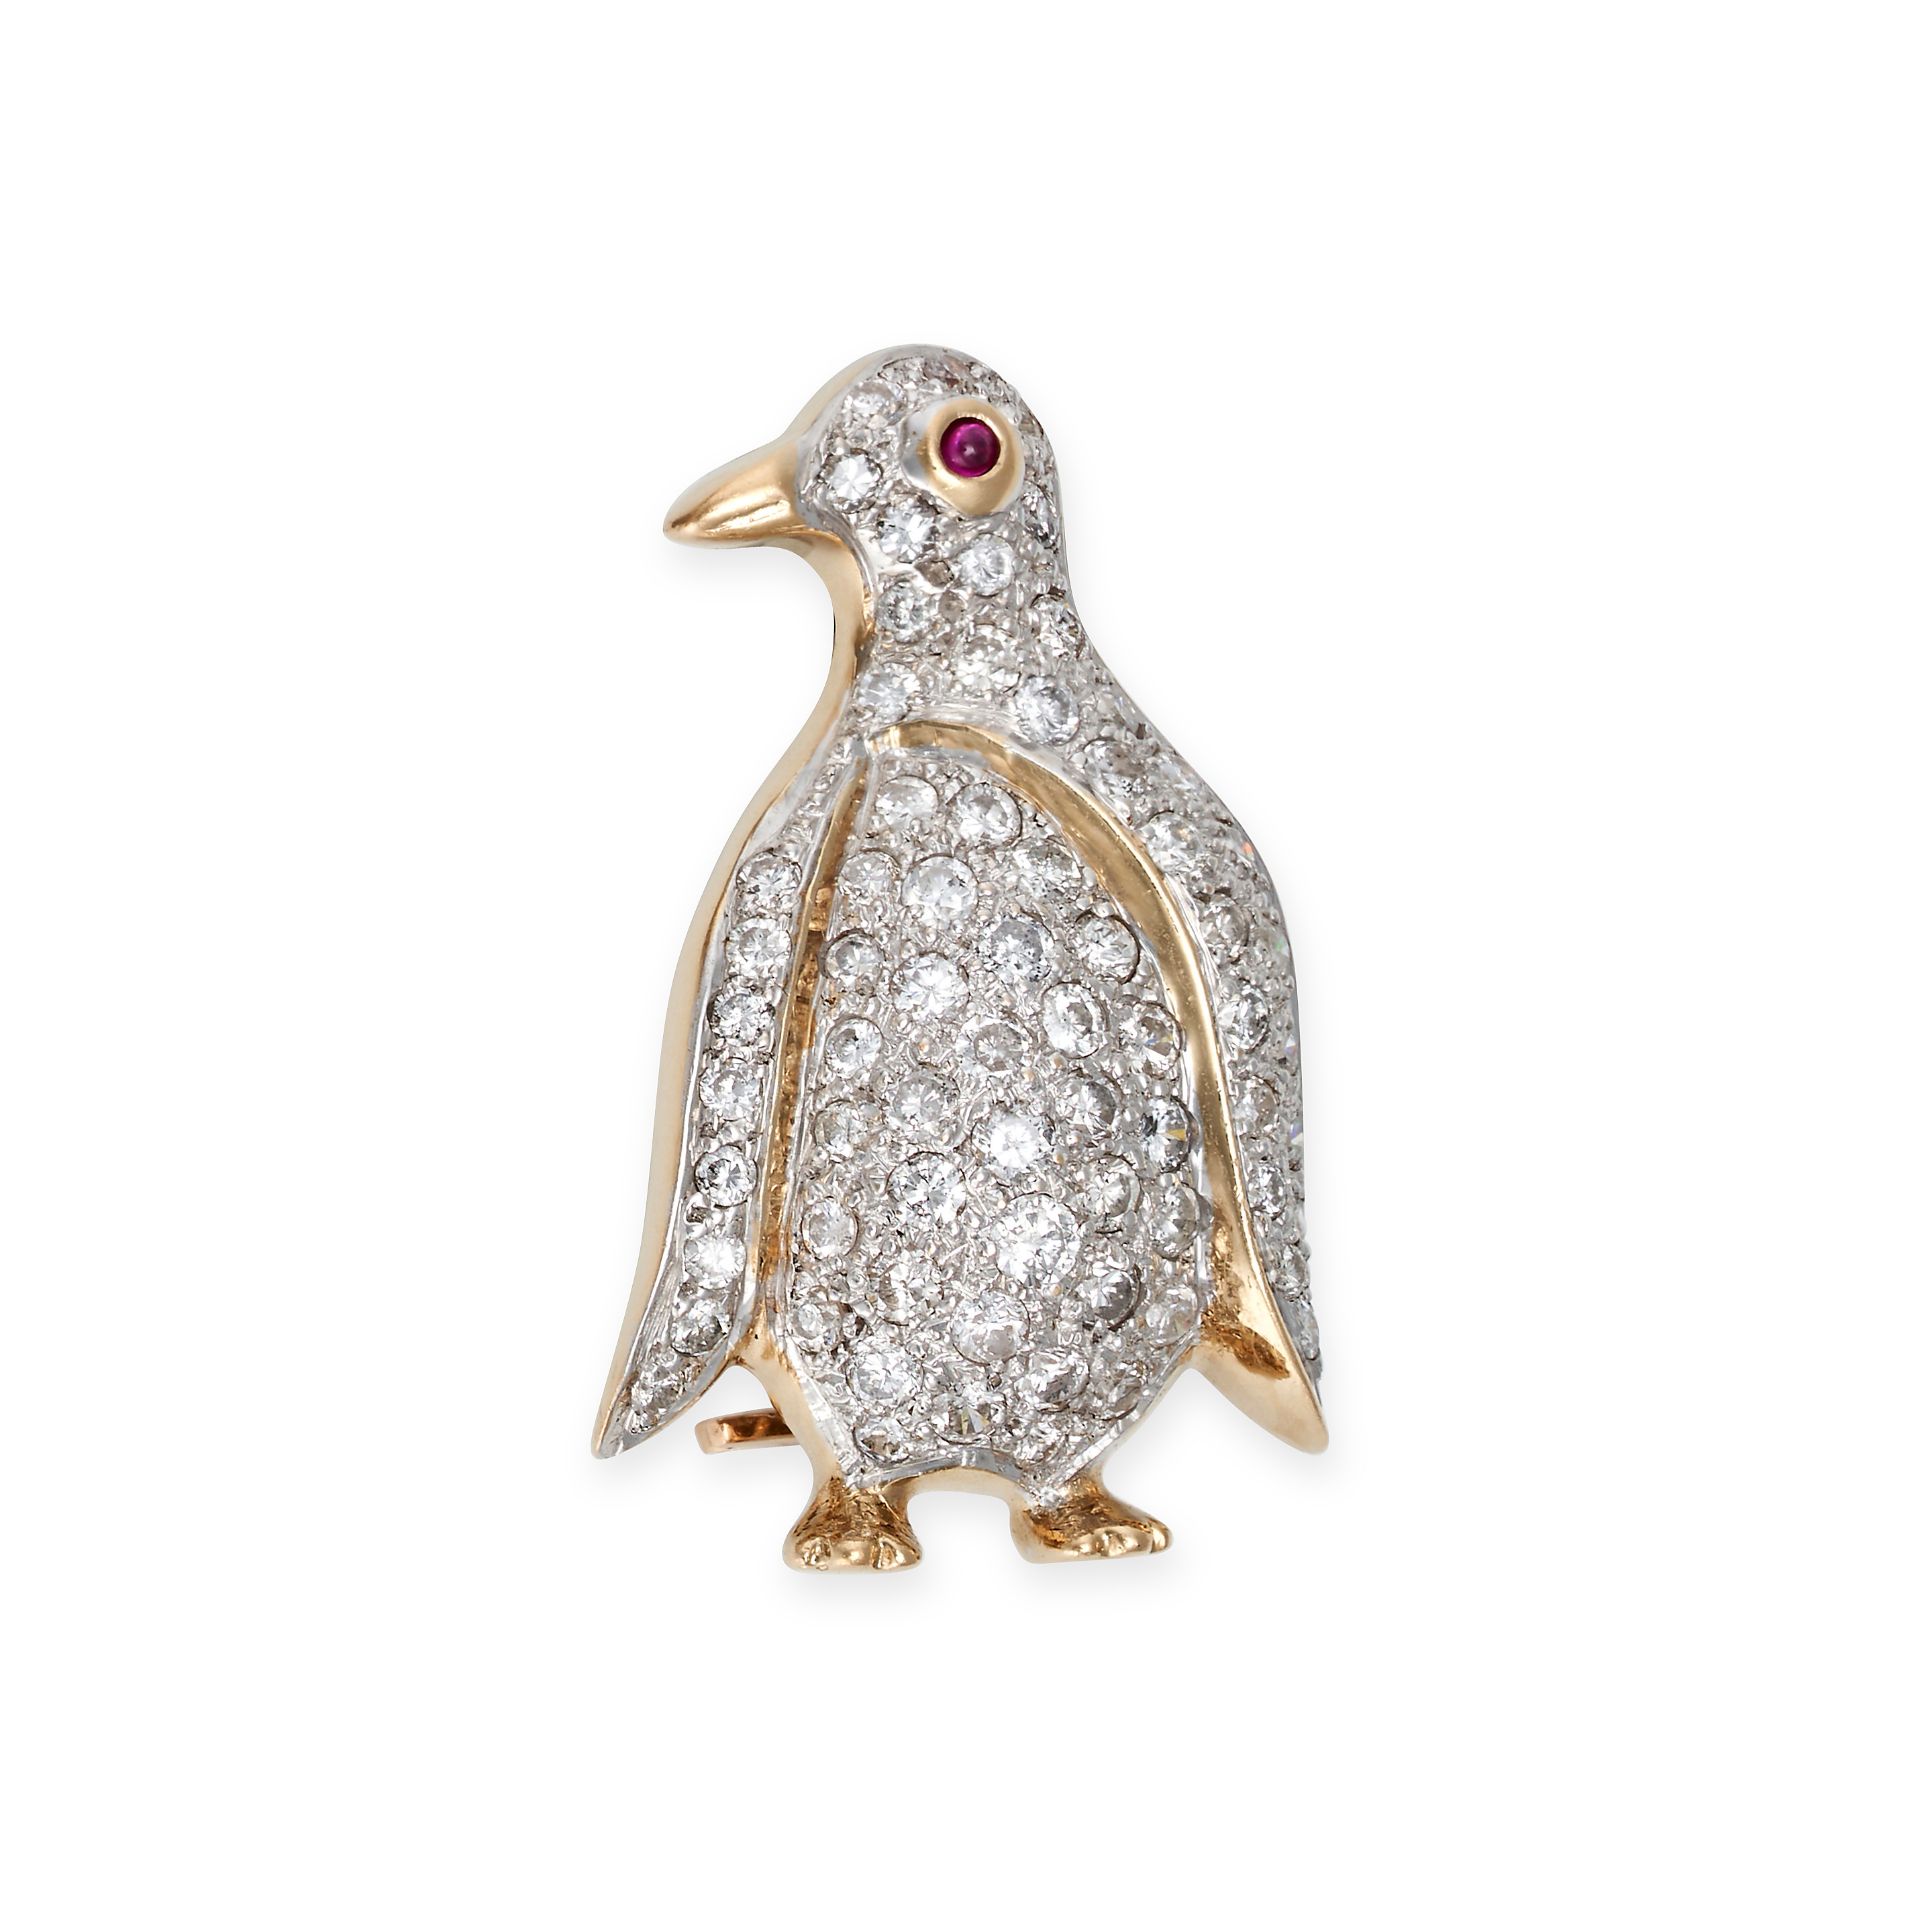 NO RESERVE - A RUBY AND DIAMOND PENGUIN BROOCH in 14ct yellow and white gold, designed as a pengu...